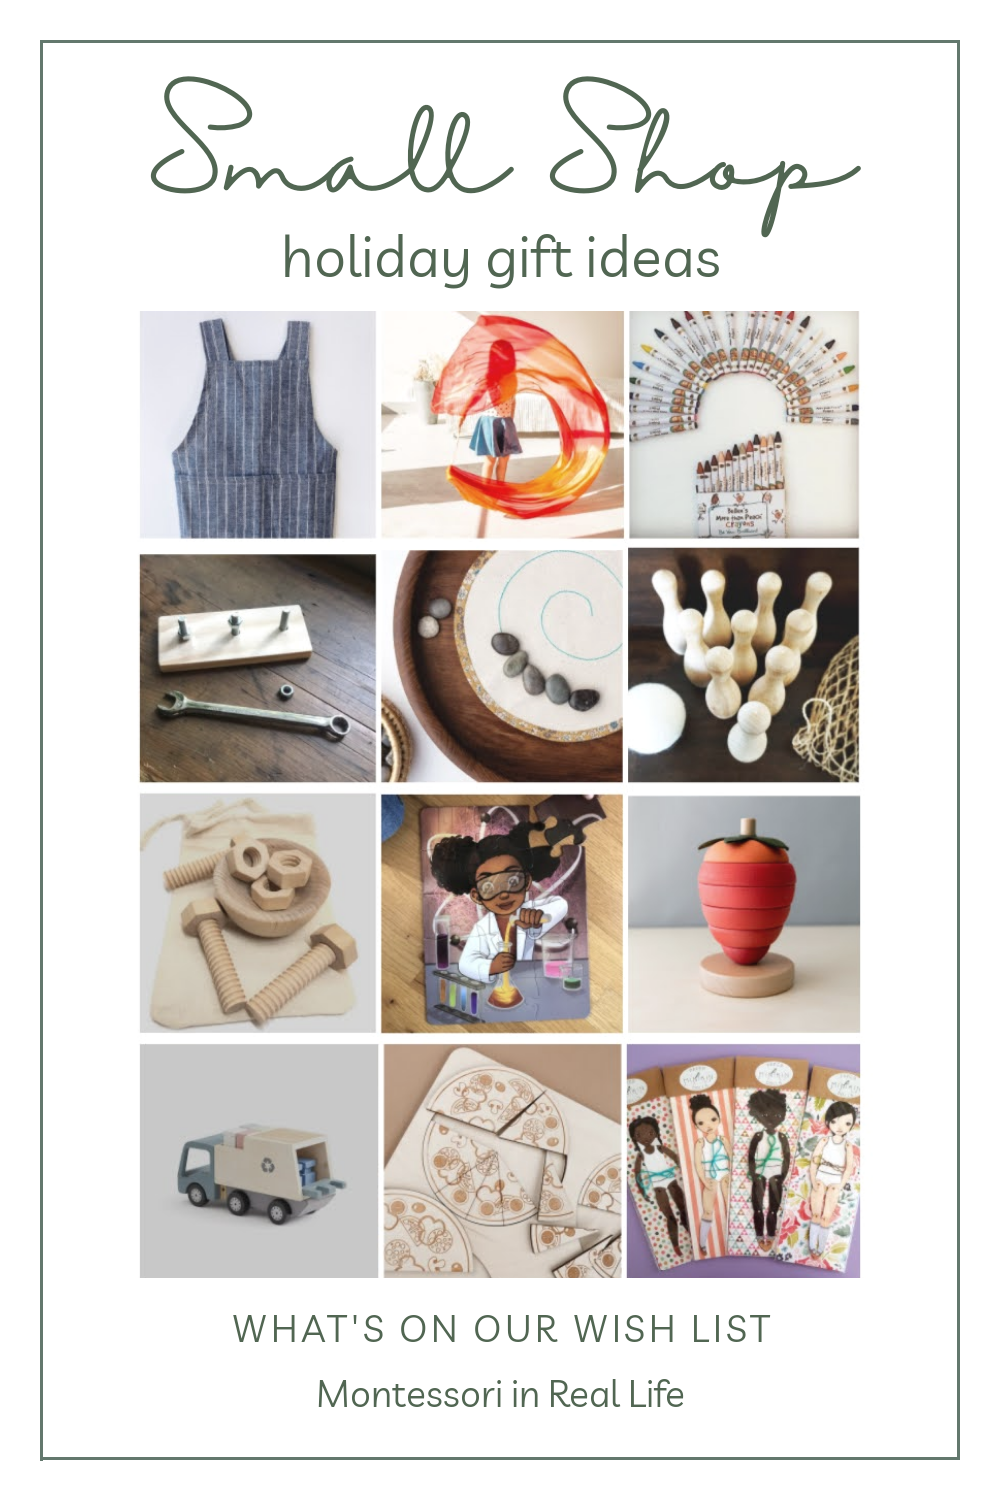 Our Small Shop Holiday List